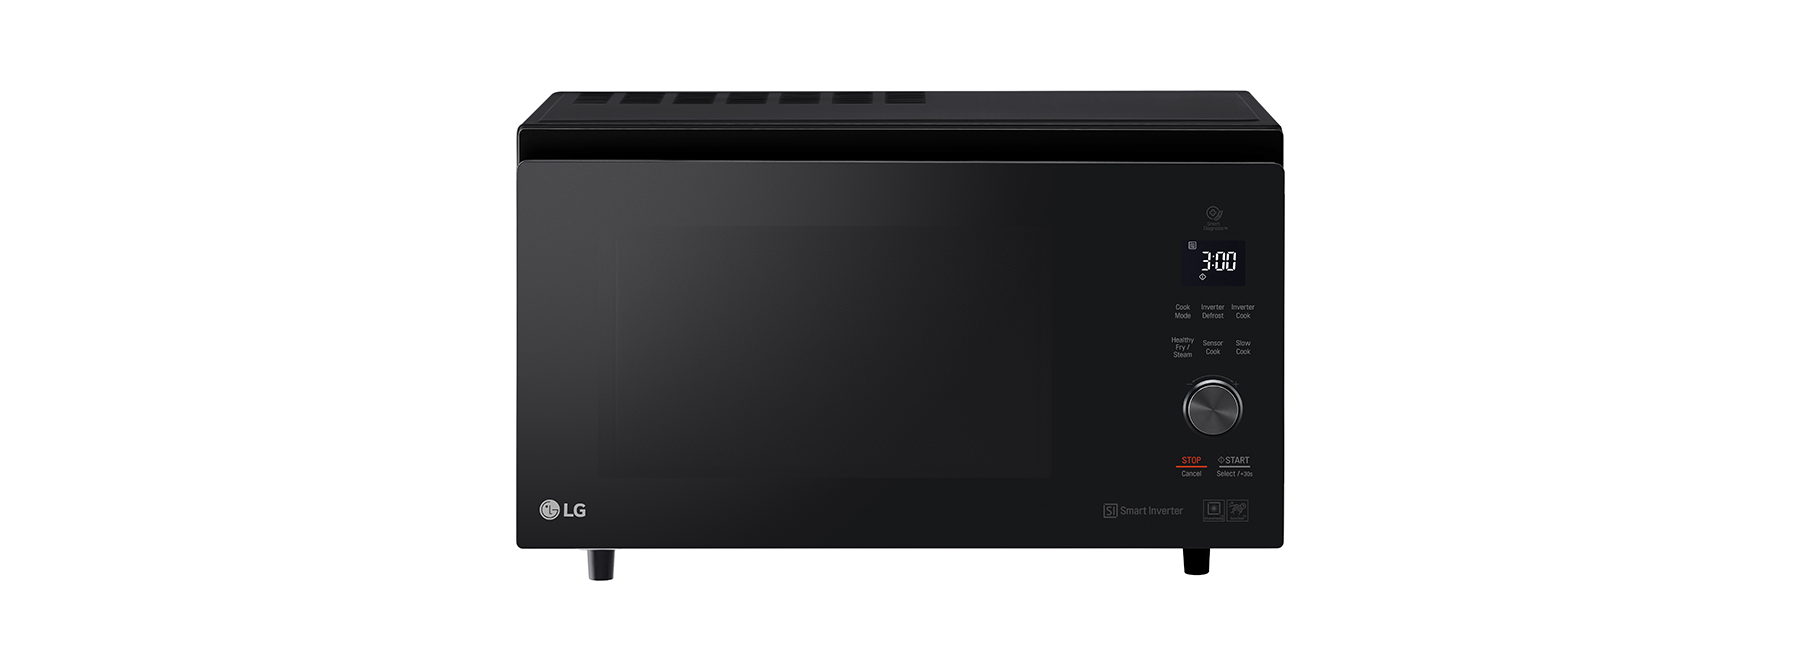 LG MIcrowave oven